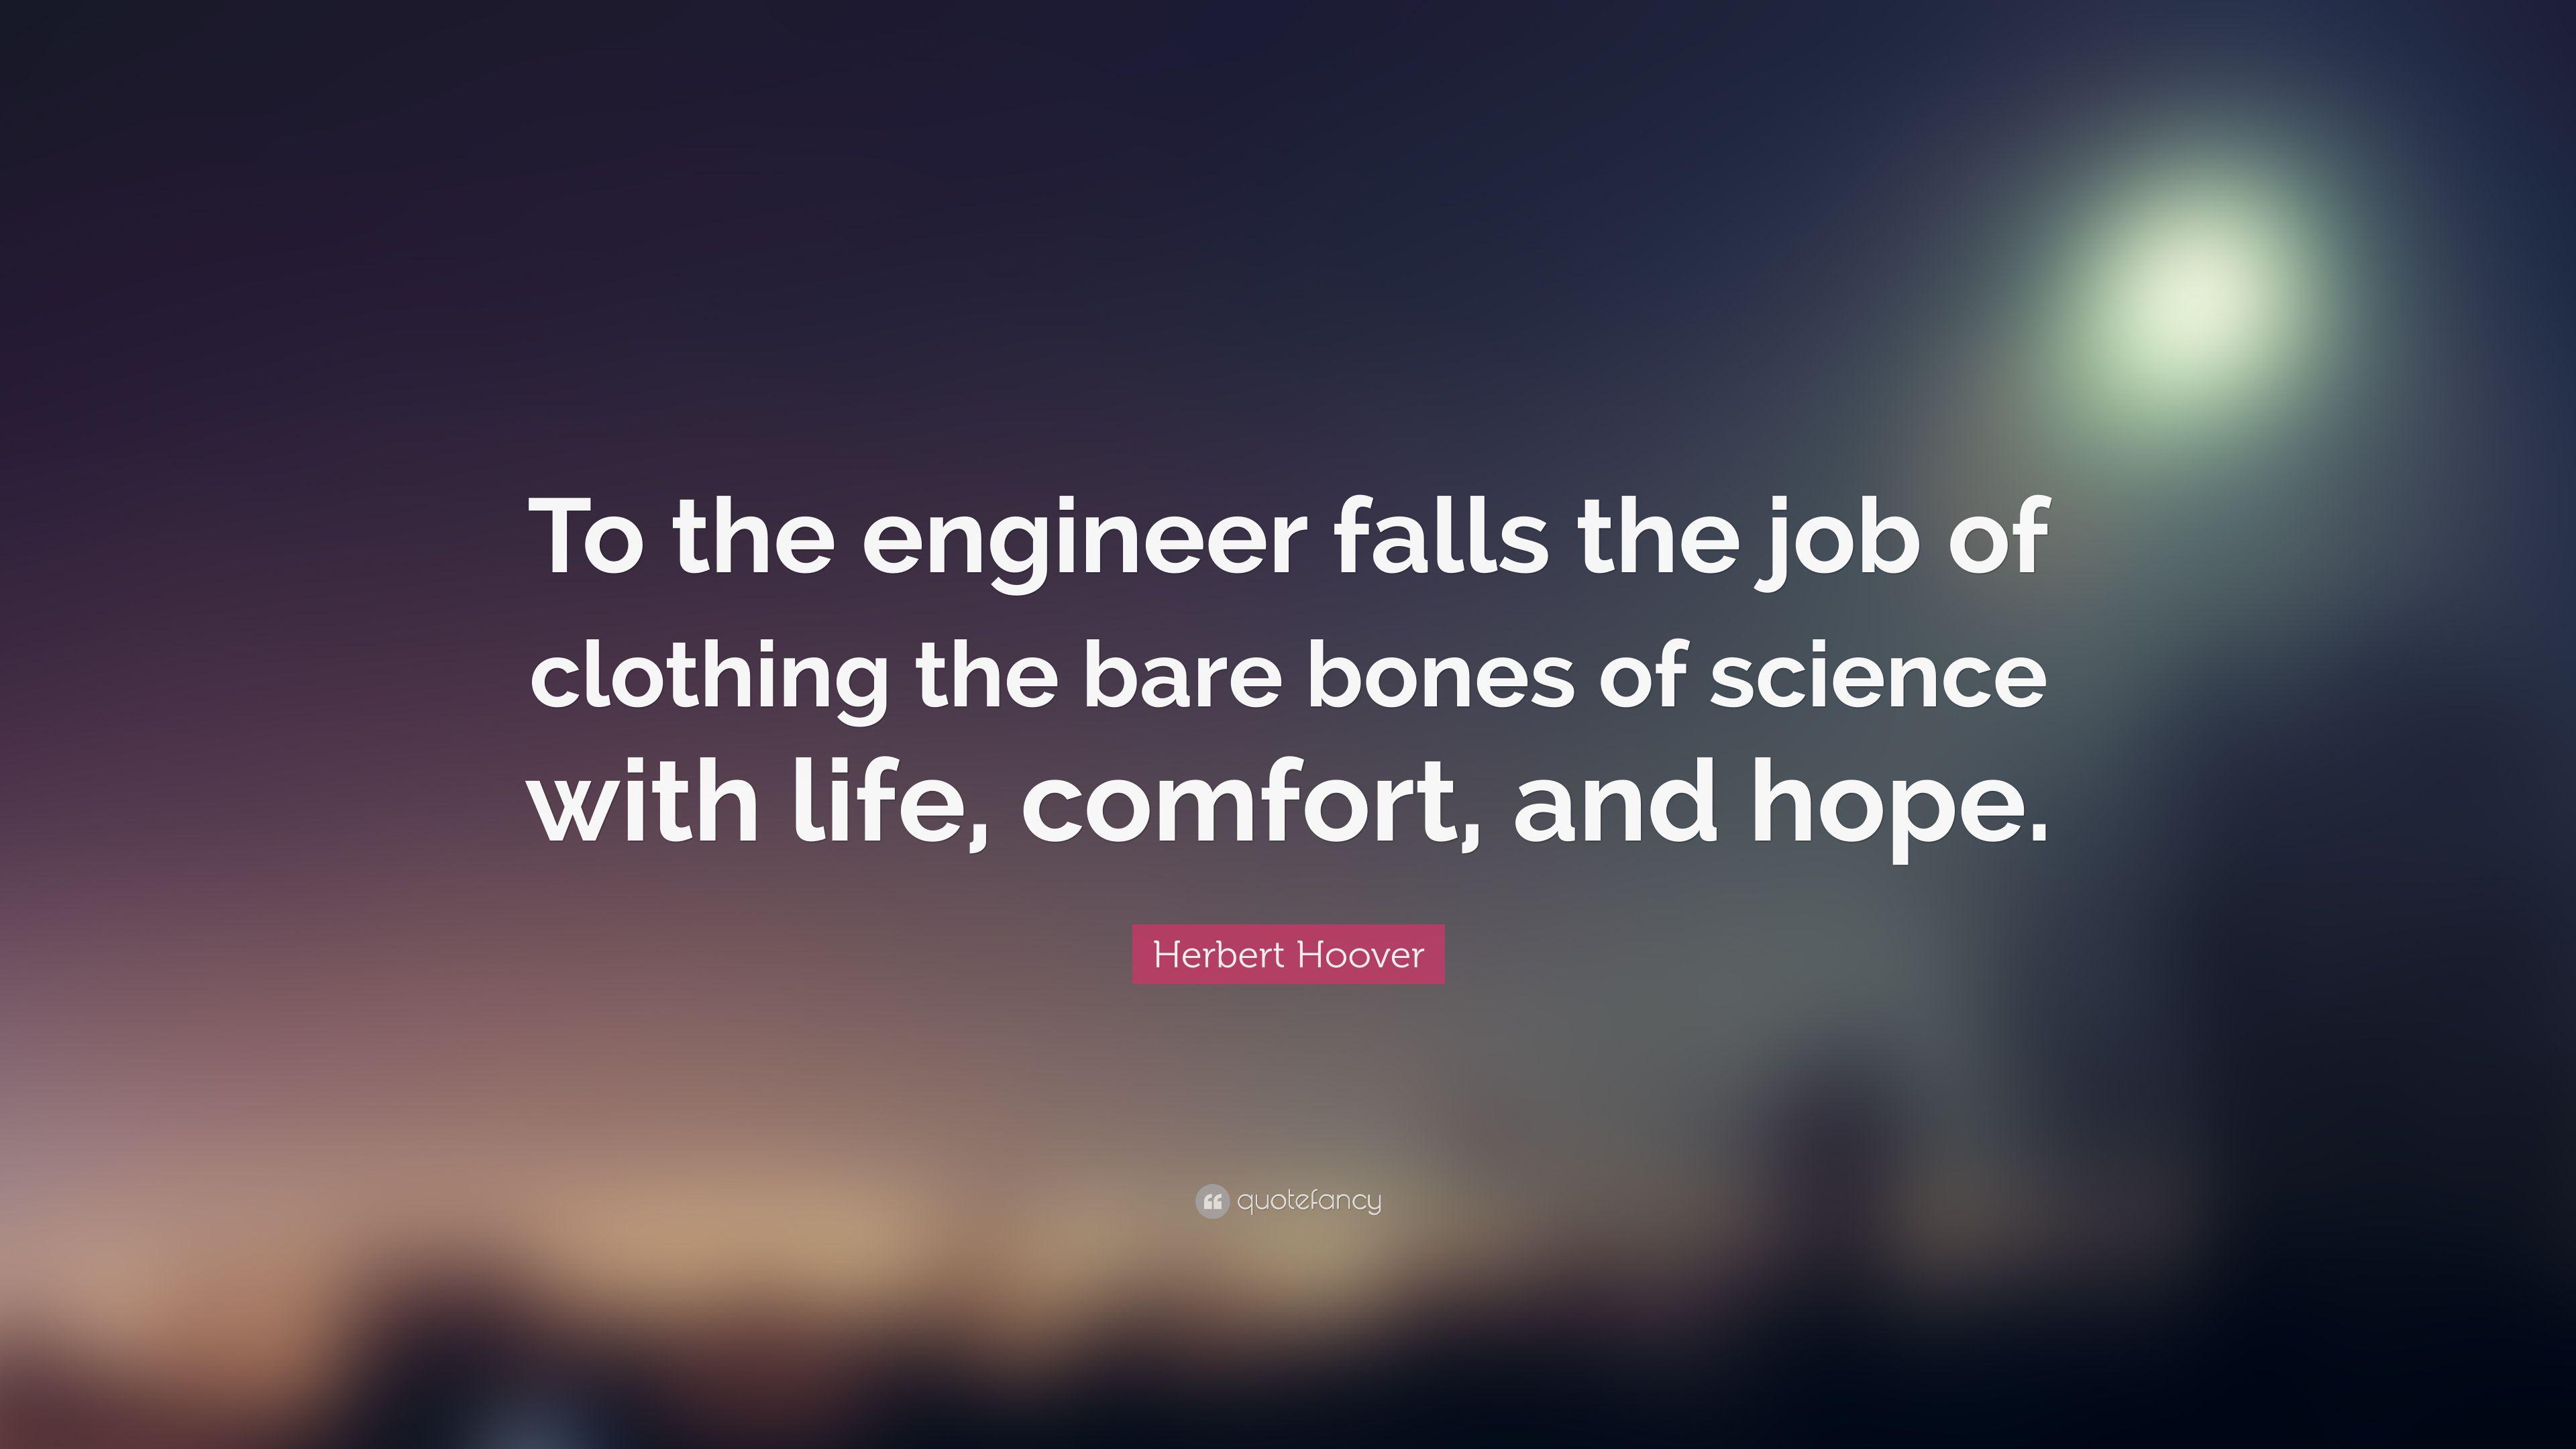 Herbert Hoover Quote: “To the engineer falls the job of clothing